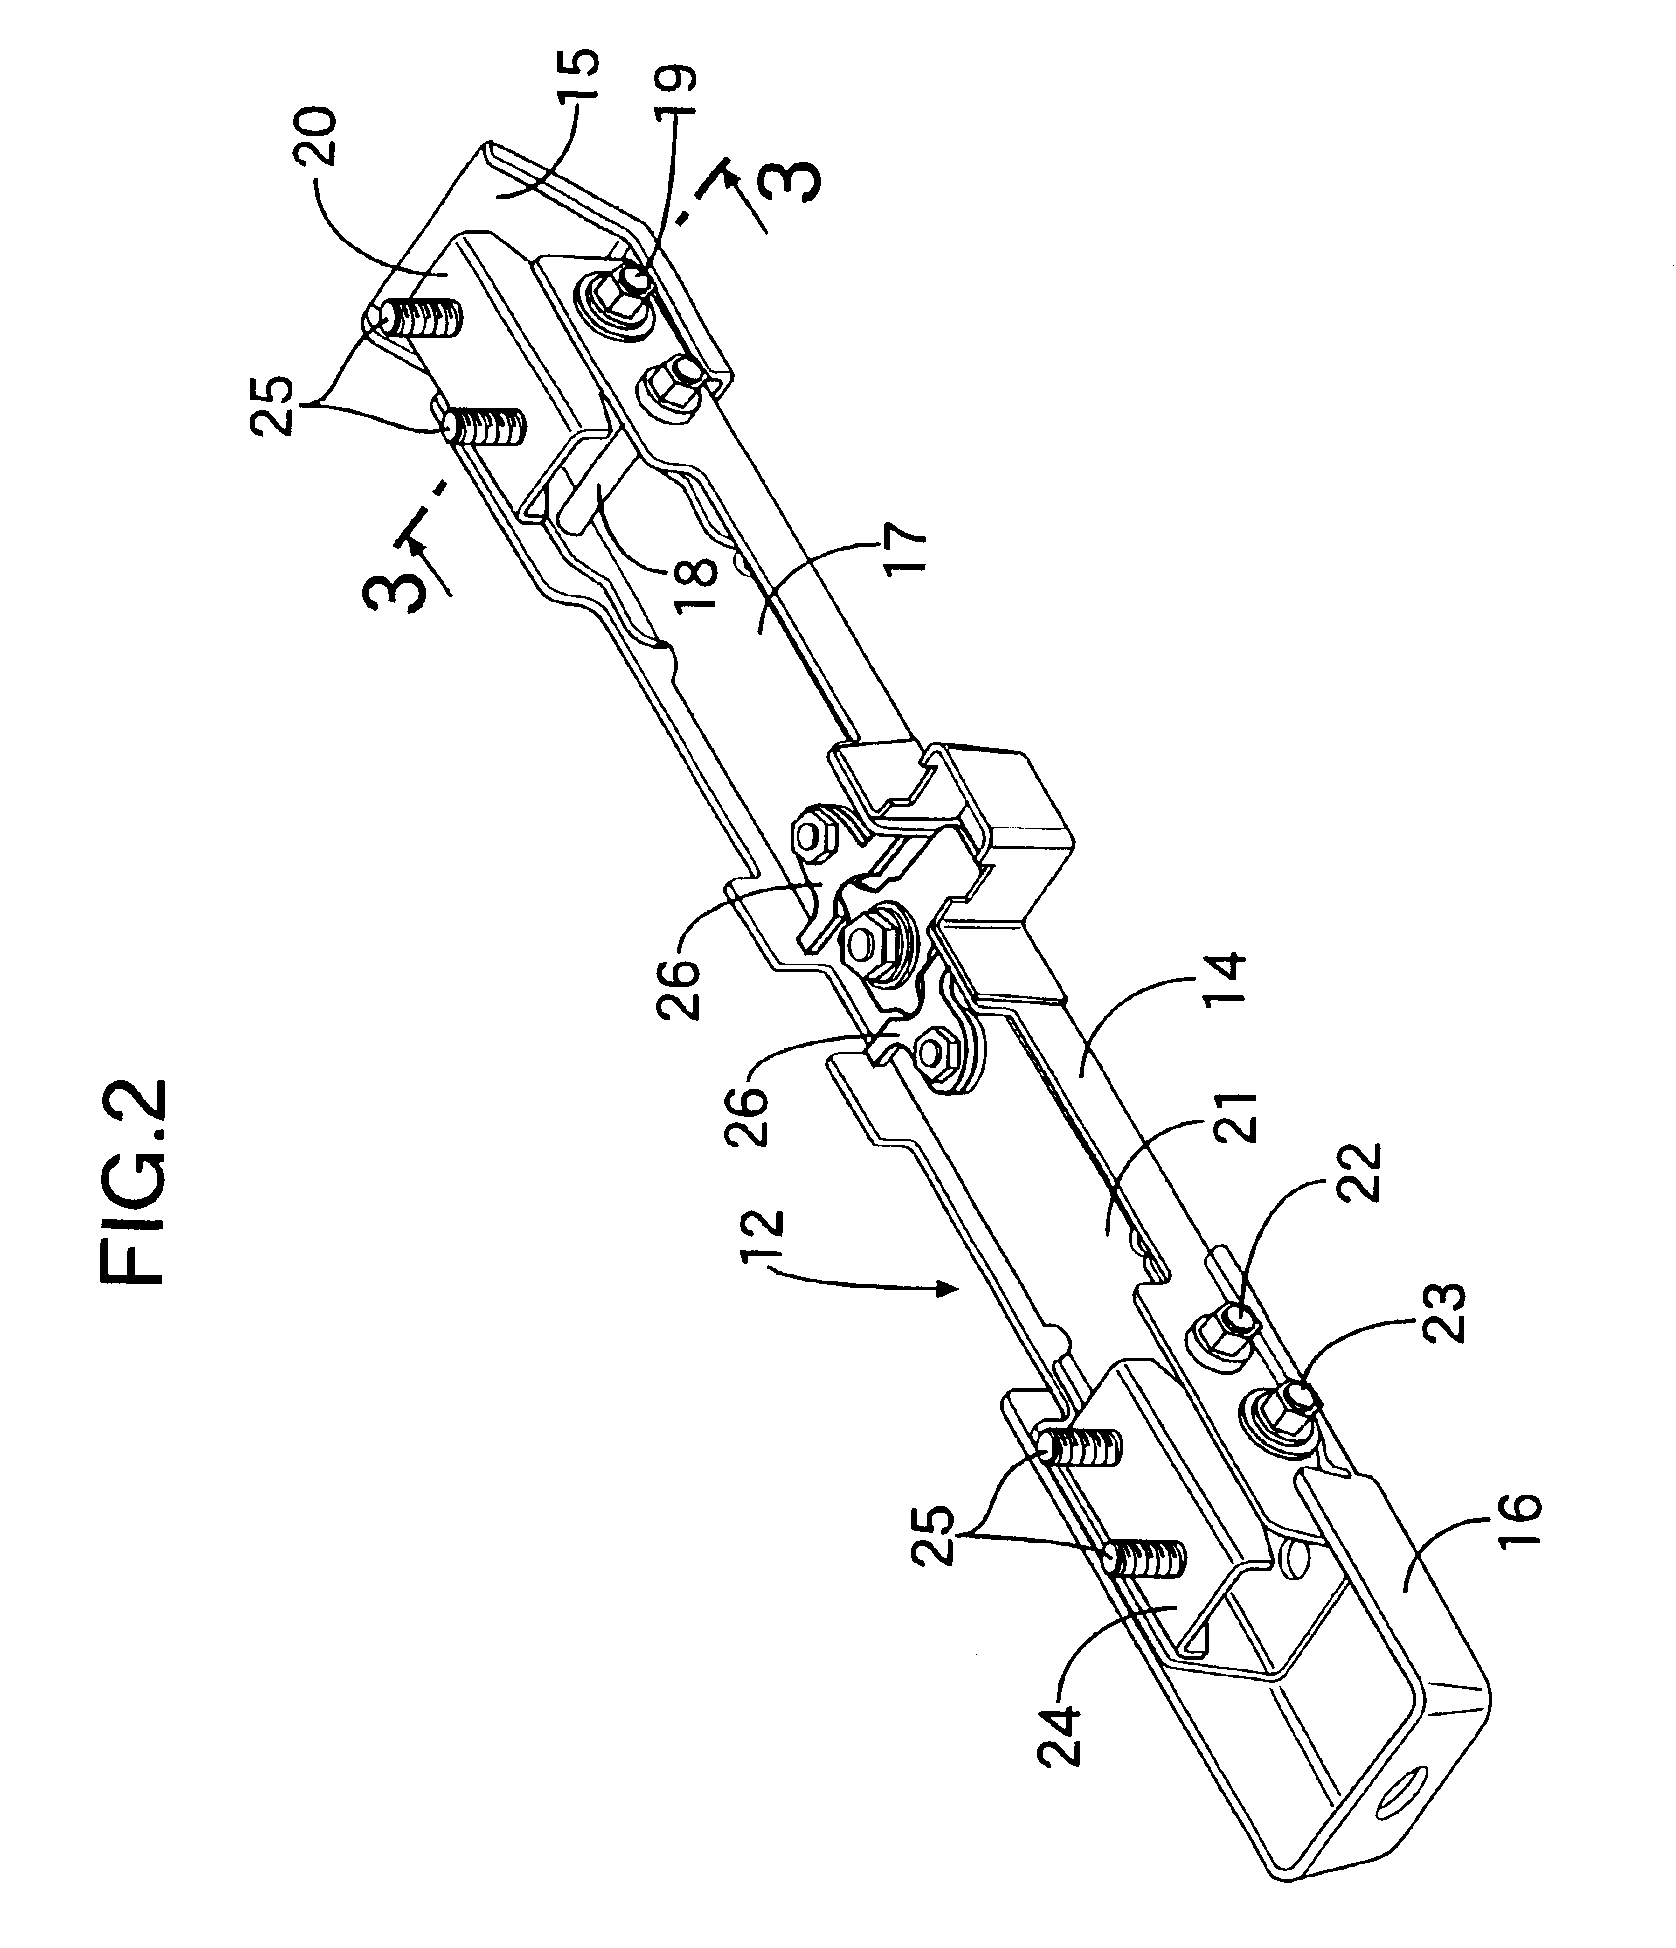 Process for controlling deployment of air bag